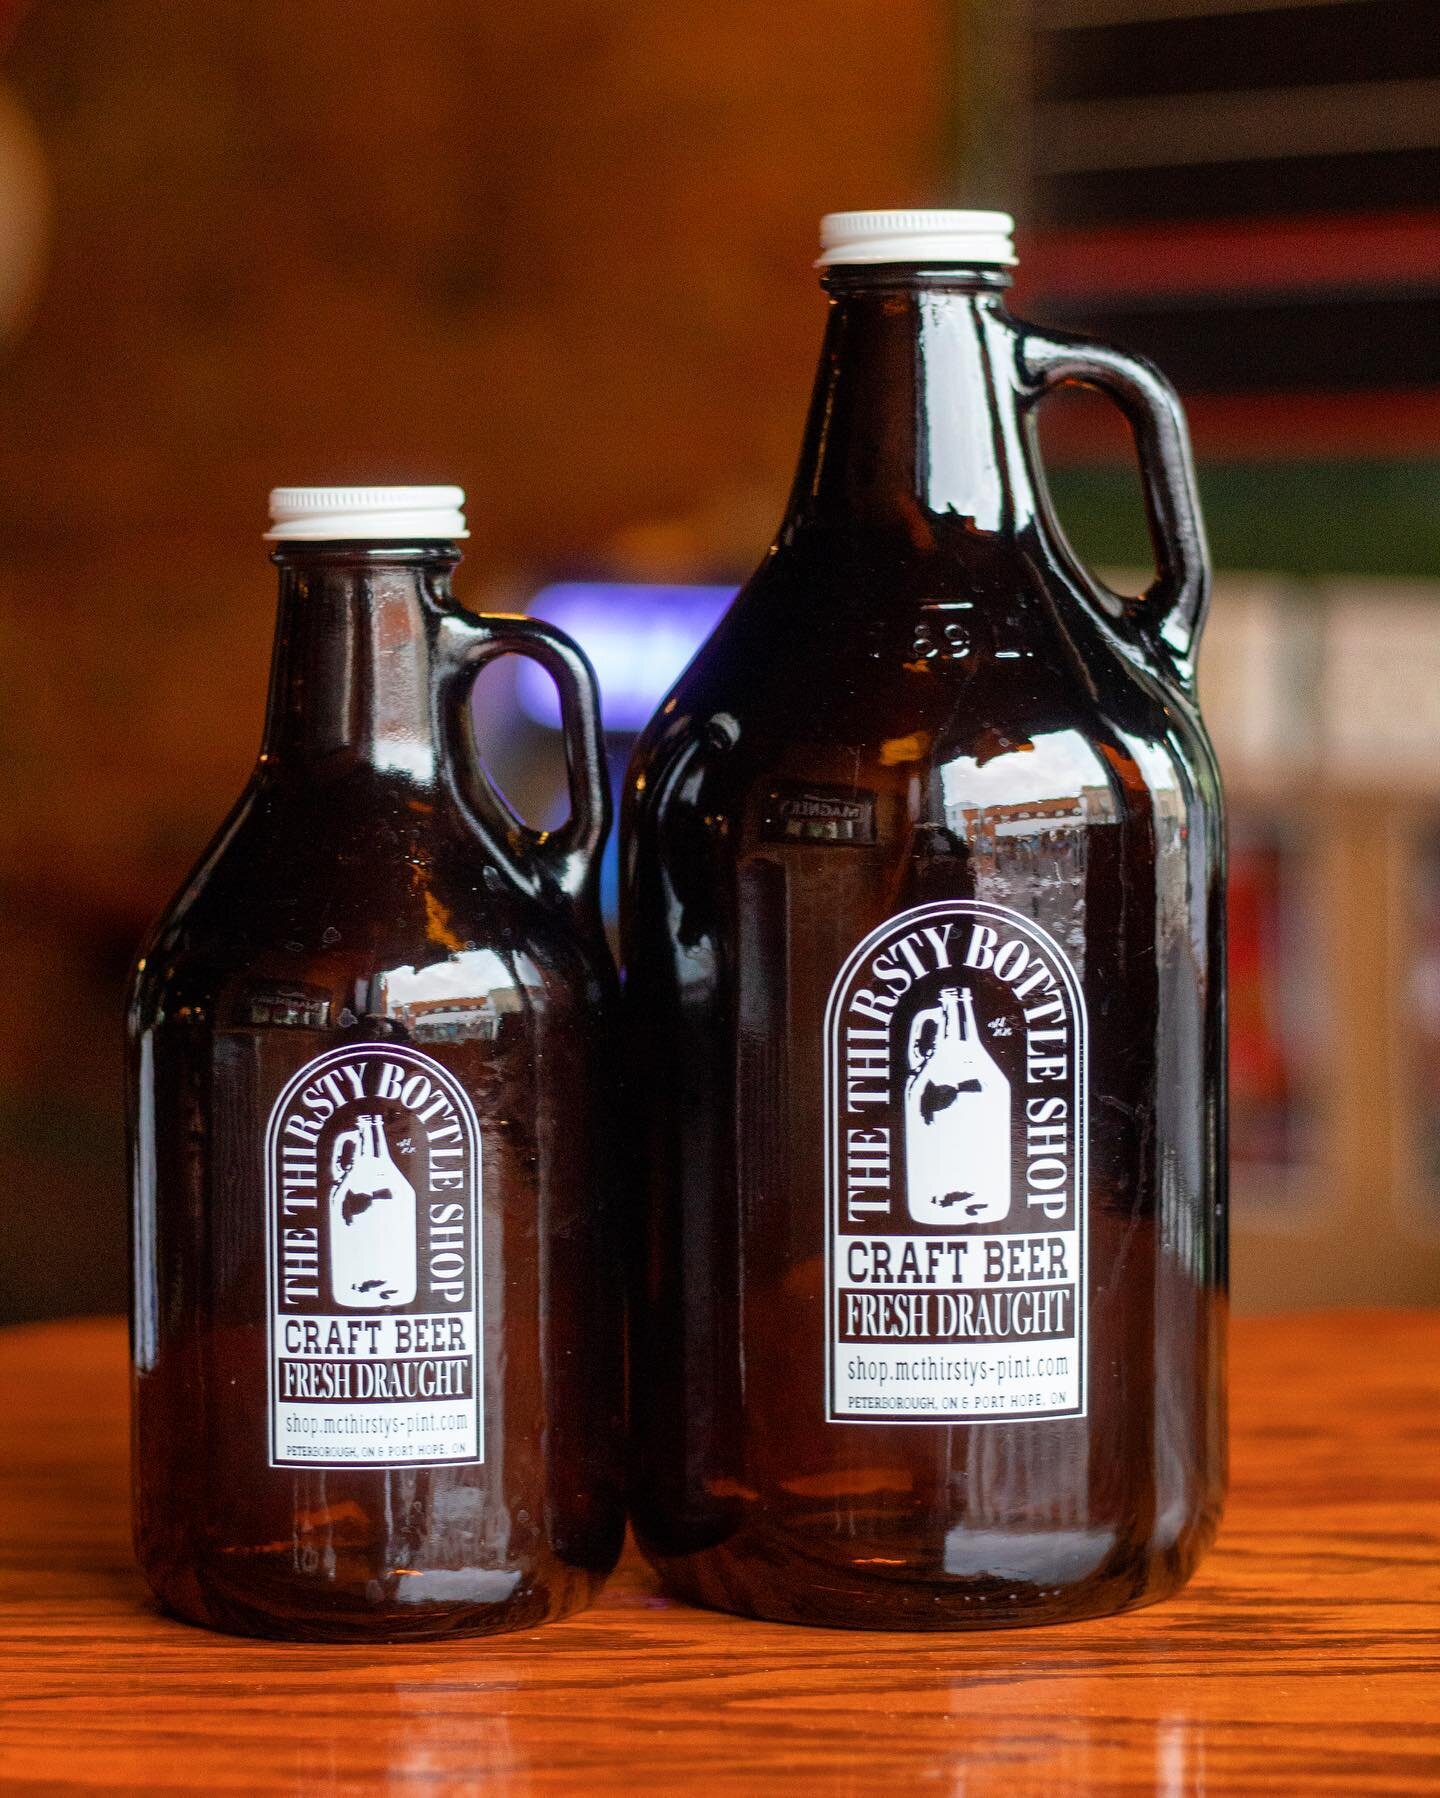 Secure your growler today! Domestic and craft beers available. We are open 4-9pm